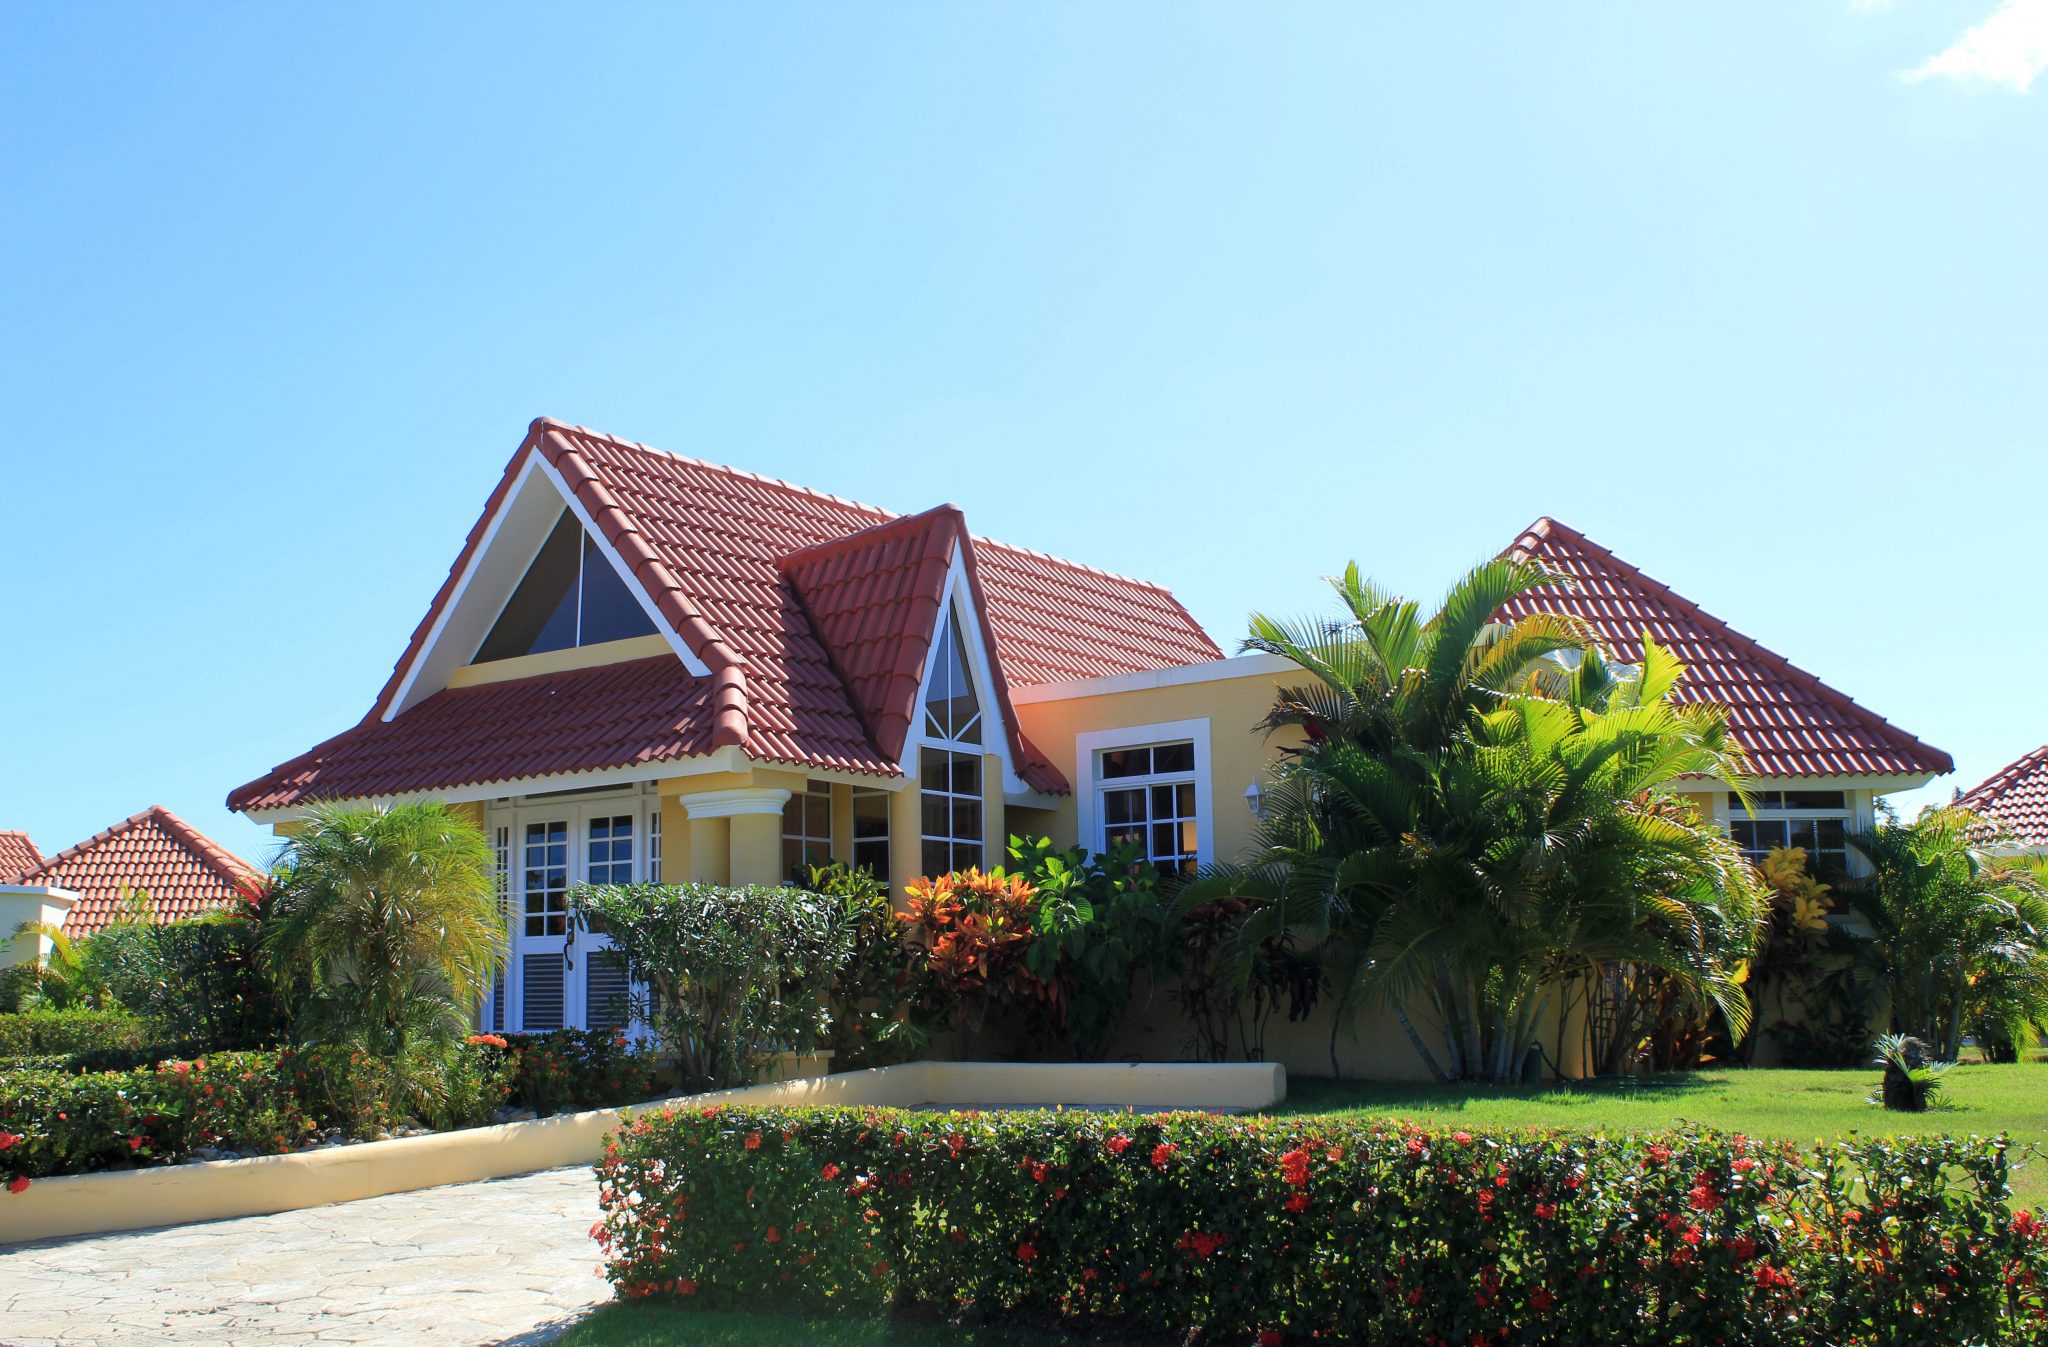 Caribbean Home, 2 Master Suites, Large Terrace To Enjoy Outdoor Living